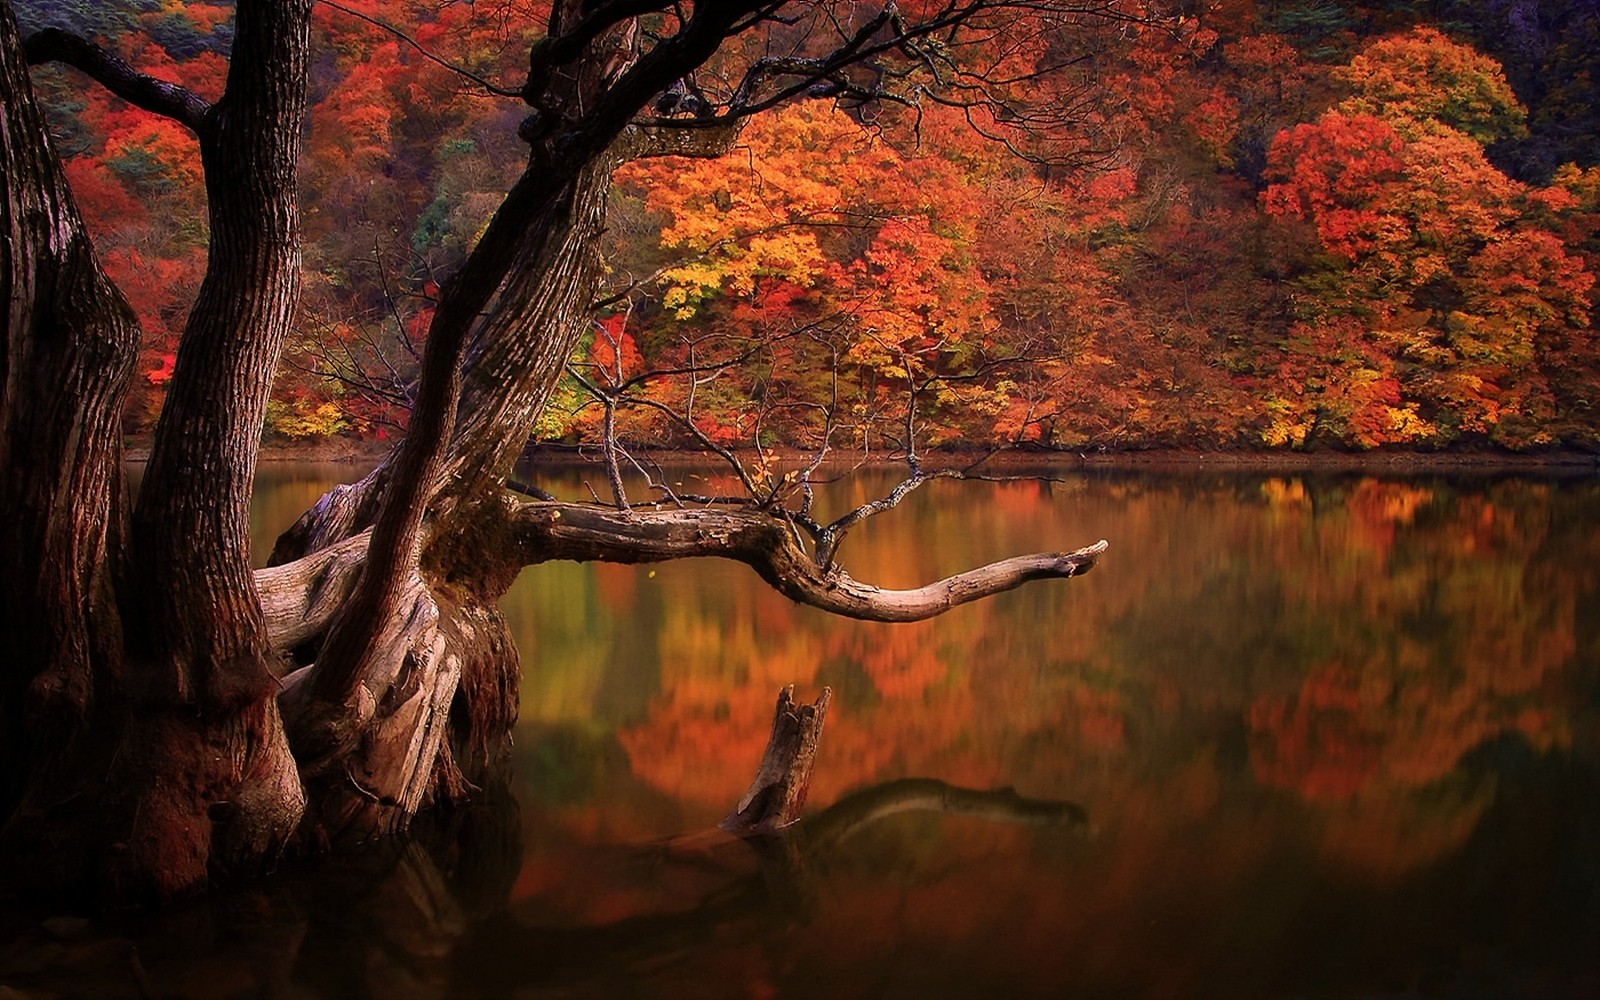 General 1600x1000 lake fall forest dead trees reflection nature South Korea landscape colorful trees water Asia